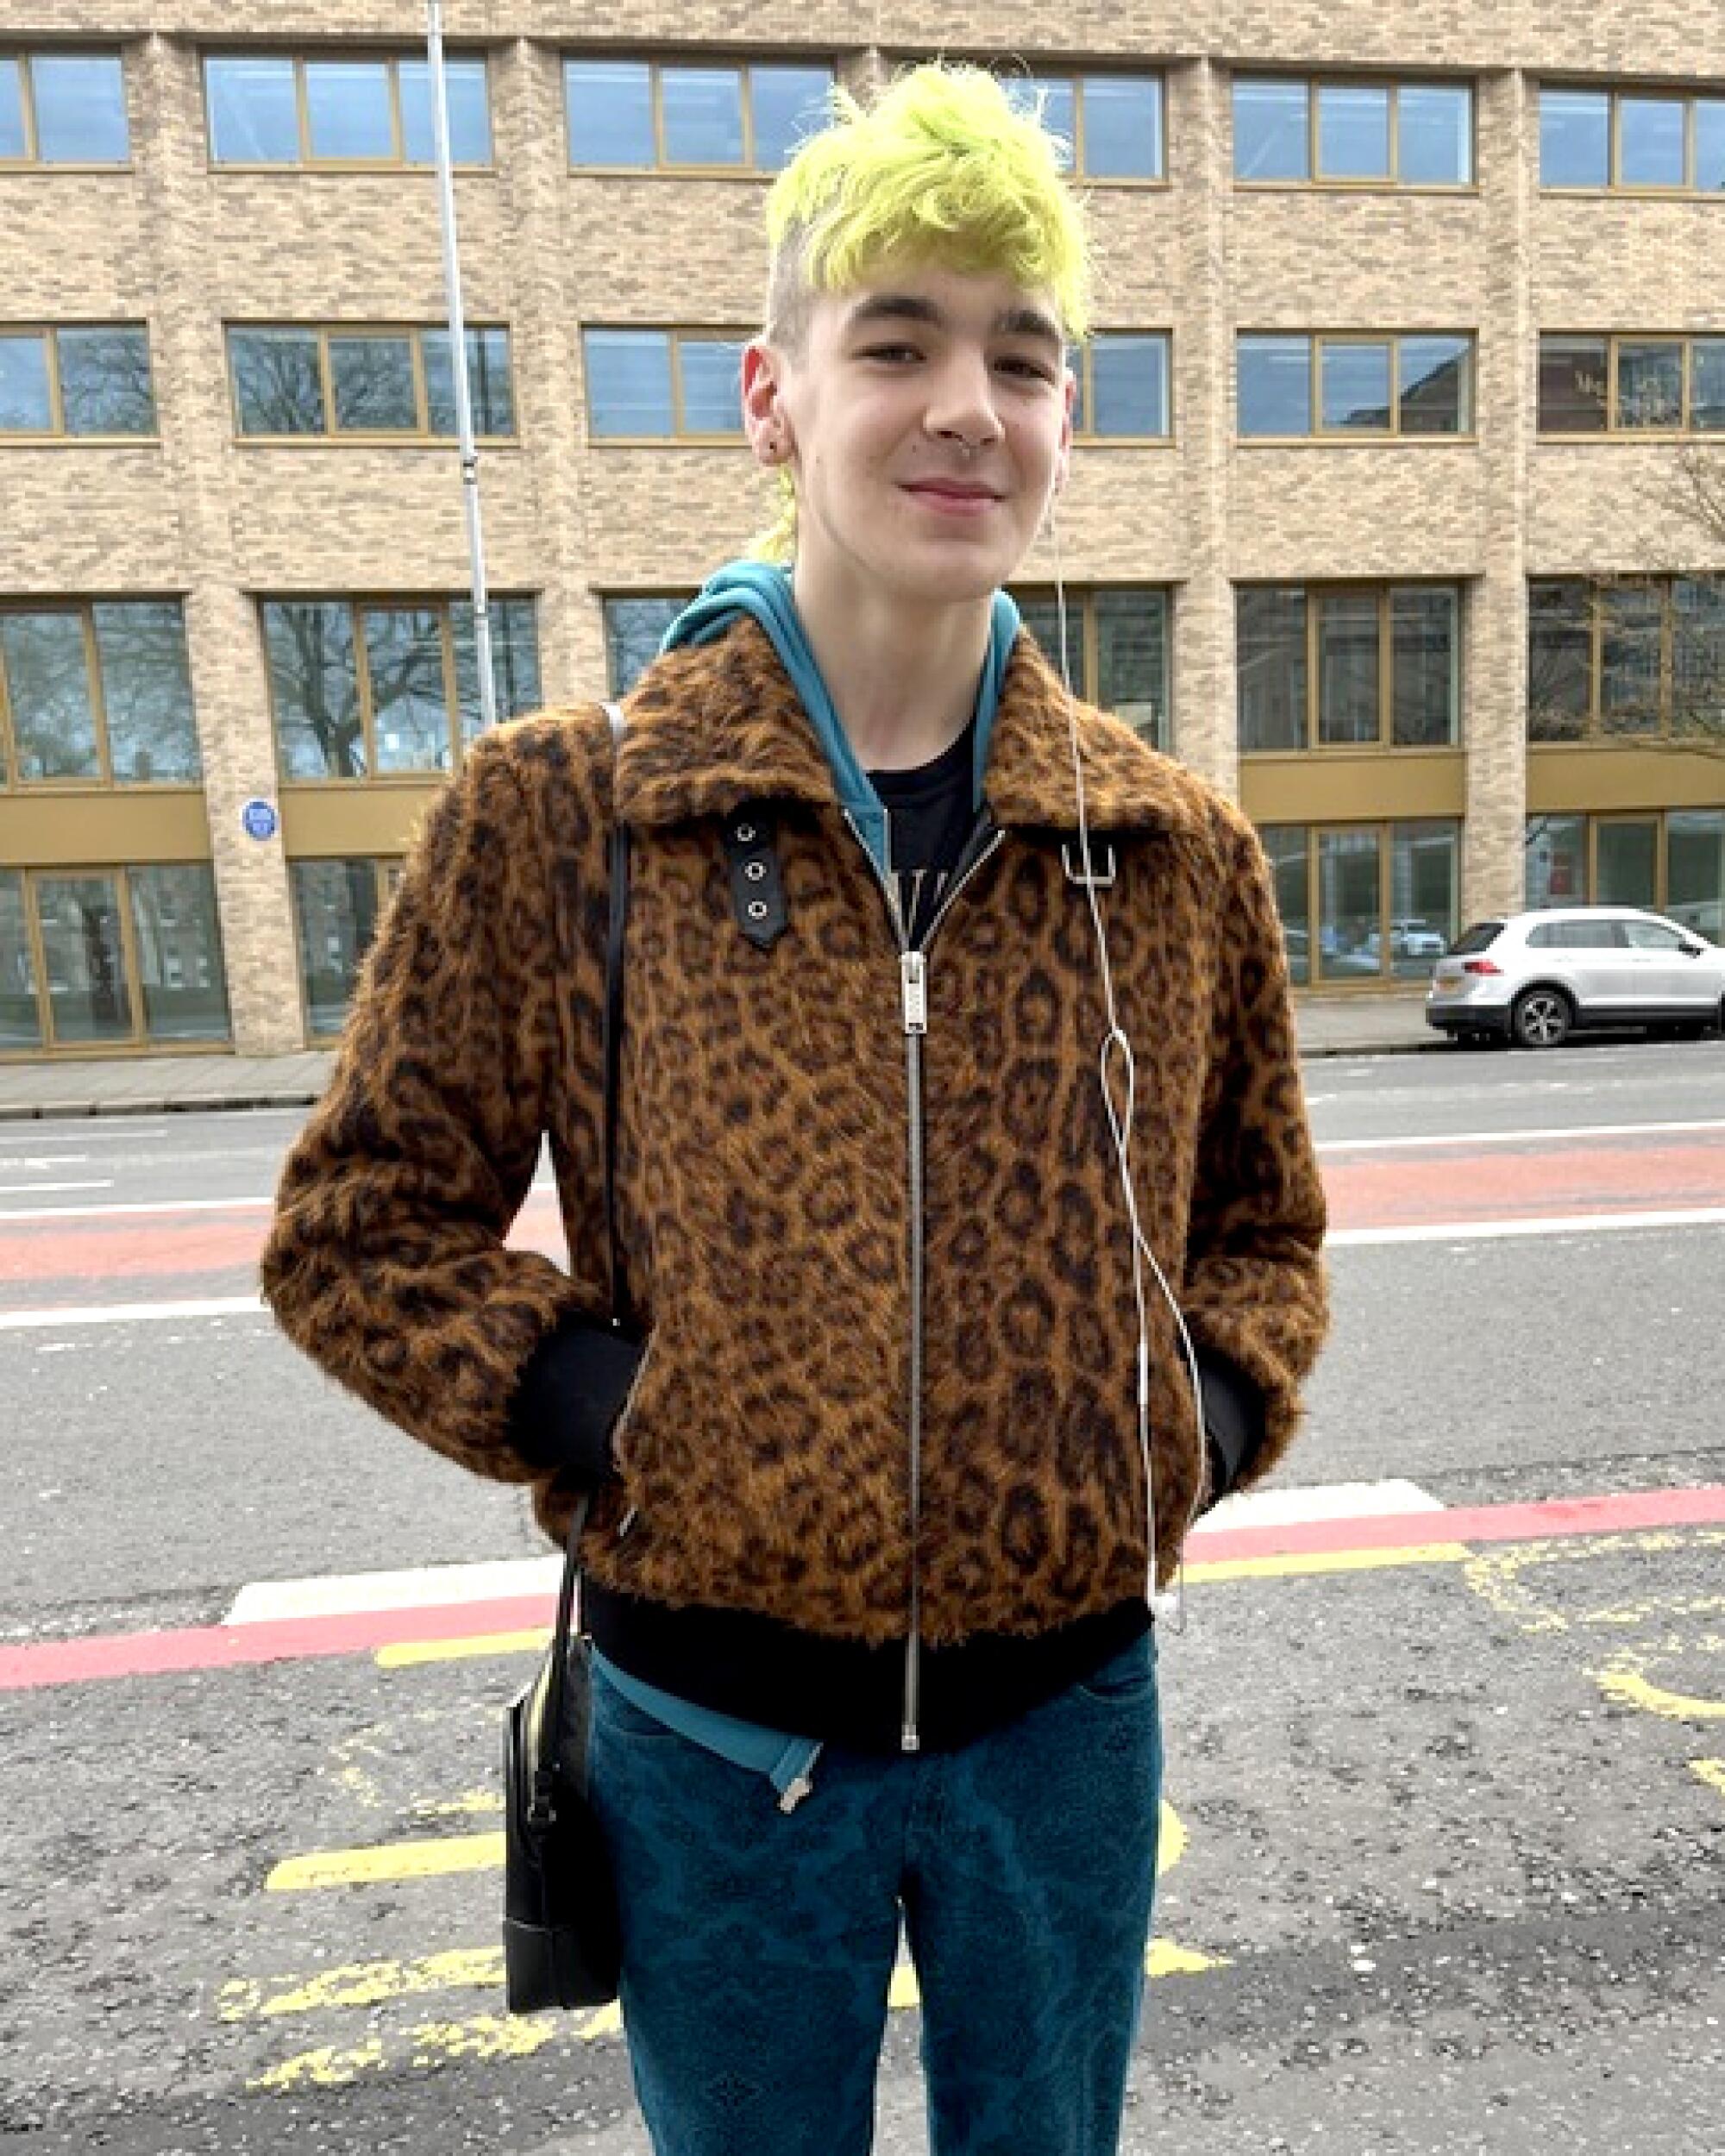 Lars Jackson wears a leopard-print jacket and has neon-green hair. Lars is standing on a street.